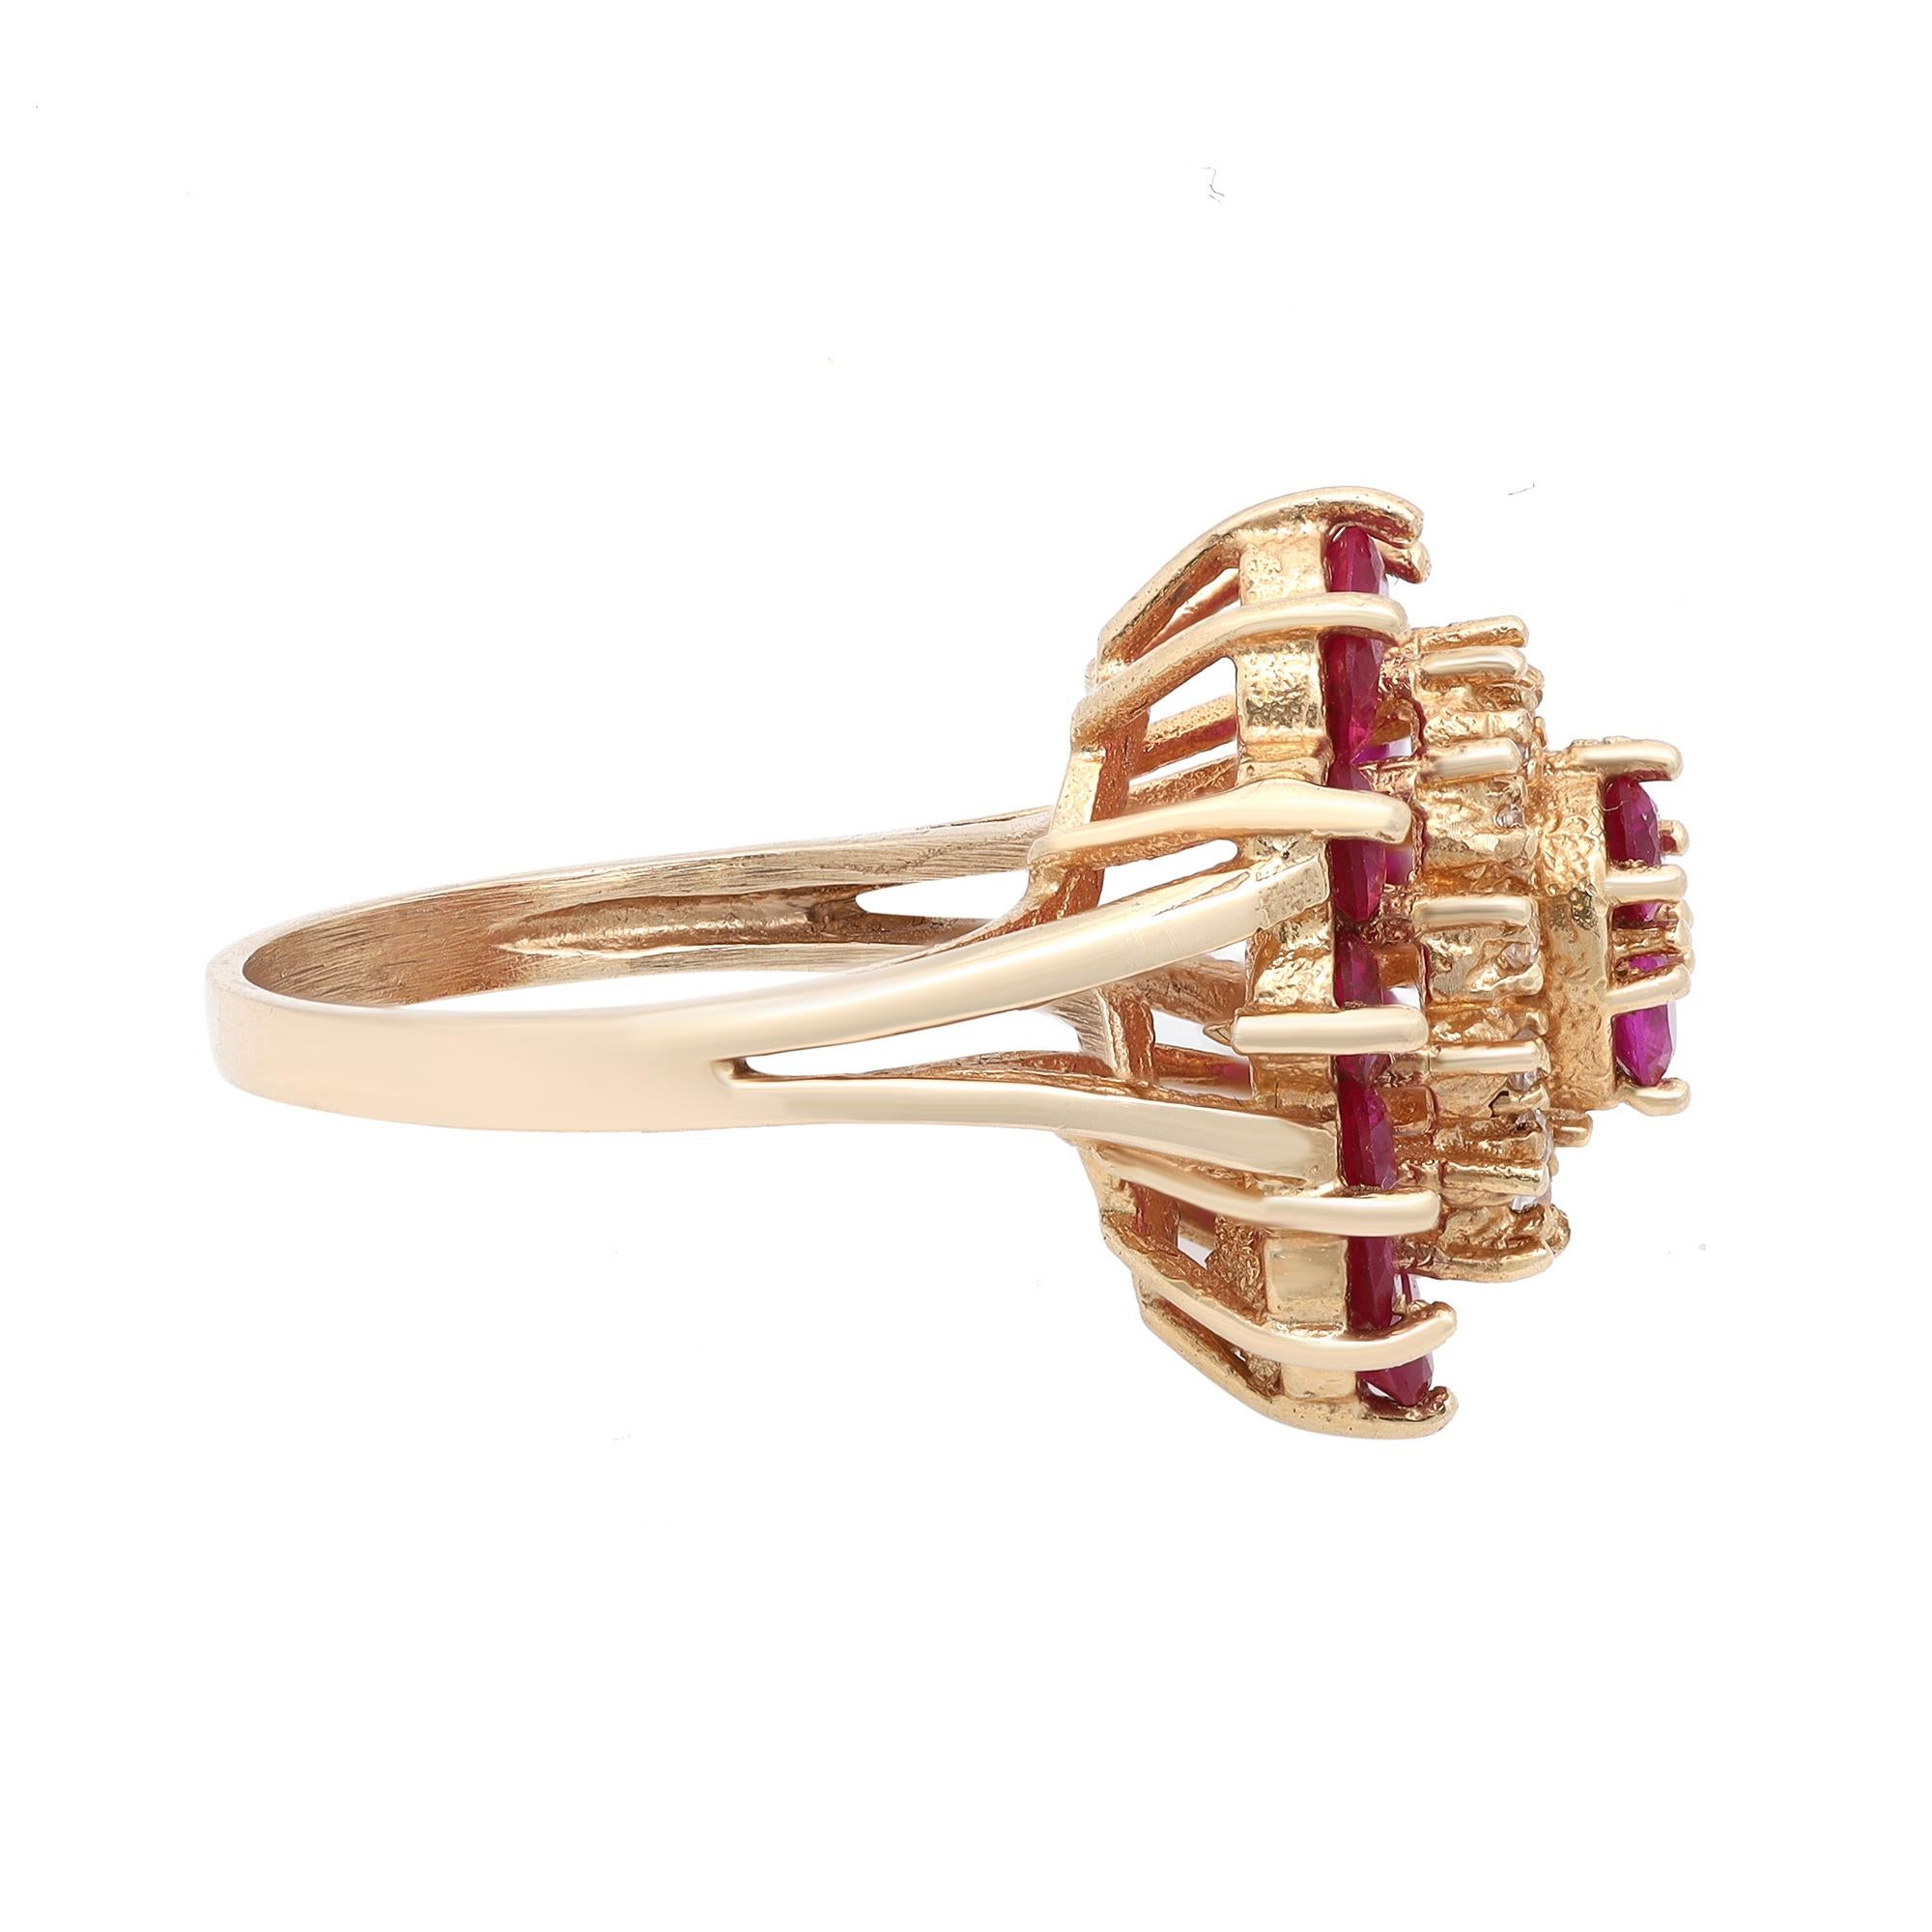 This gorgeous ladies ring is crafted in 14k yellow gold. Features 14 prong set round cut synthetic Rubies with 11 sparkling round brilliant cut diamonds. Ring size 5.75. Total weight: 5.96 grams. Great pre-owned condition. Comes with a presentable